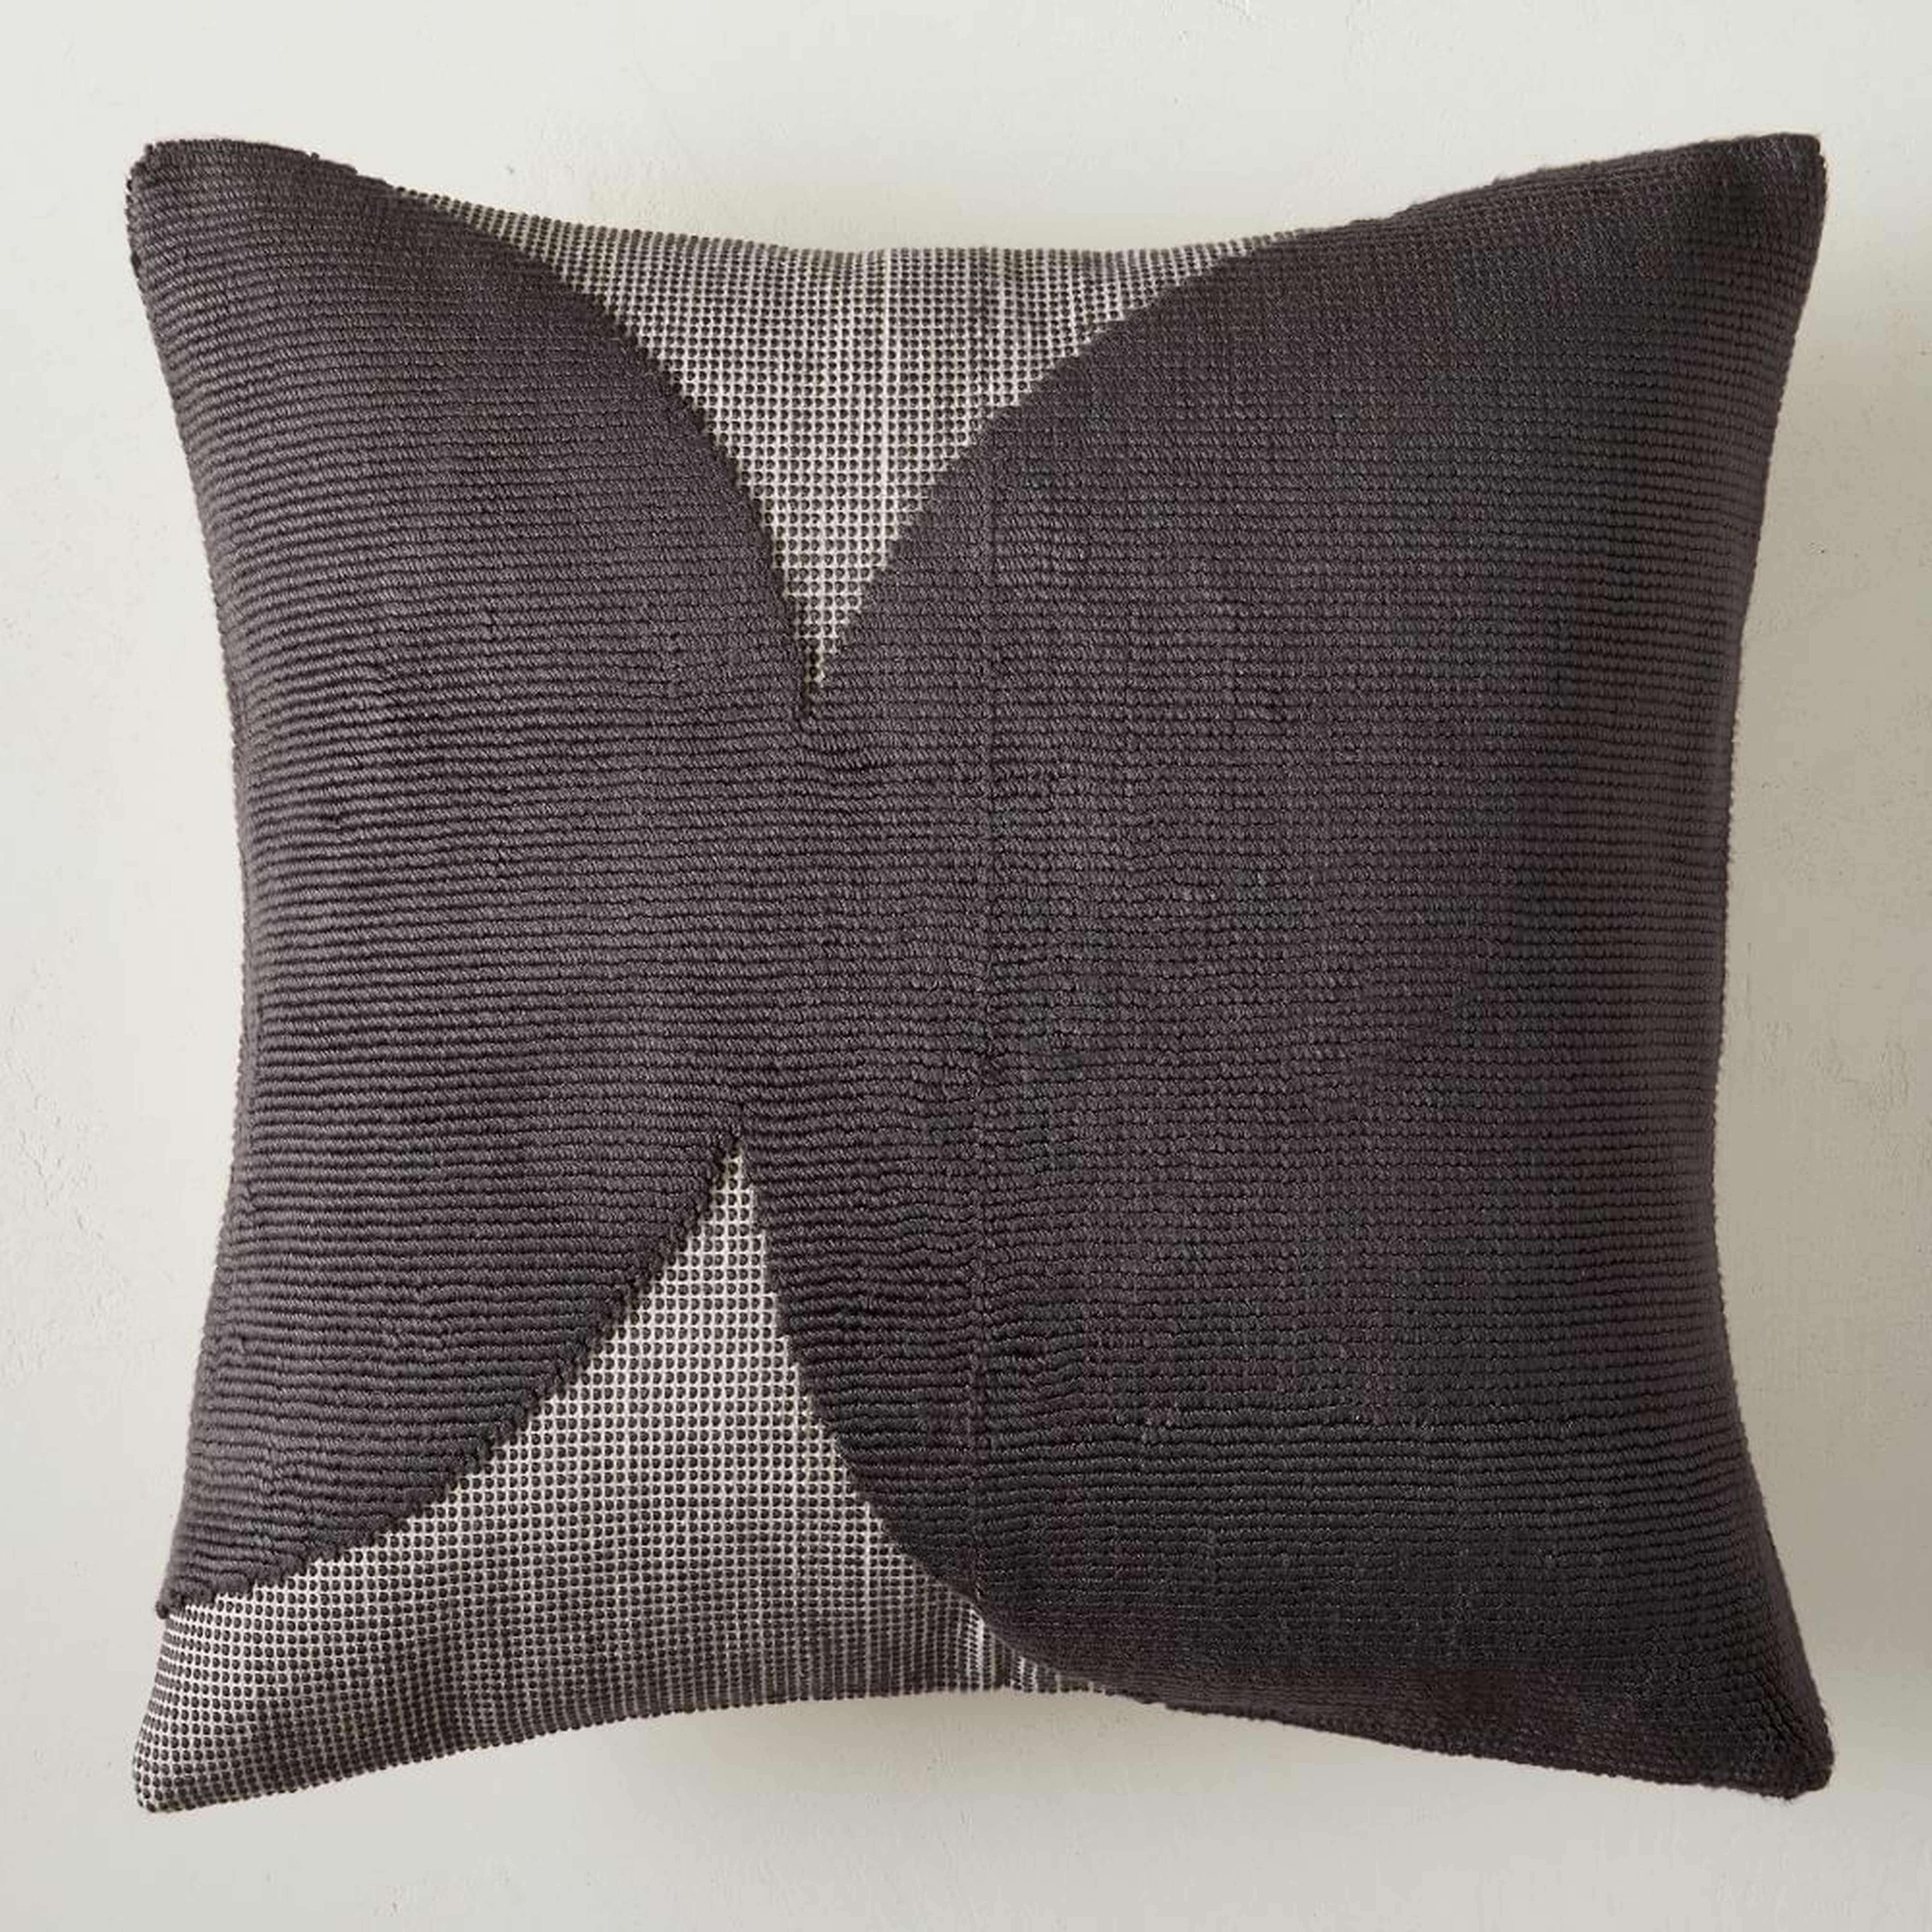 Loomed Loops Pillow Cover, Slate, 20x20, Set of 2 - West Elm